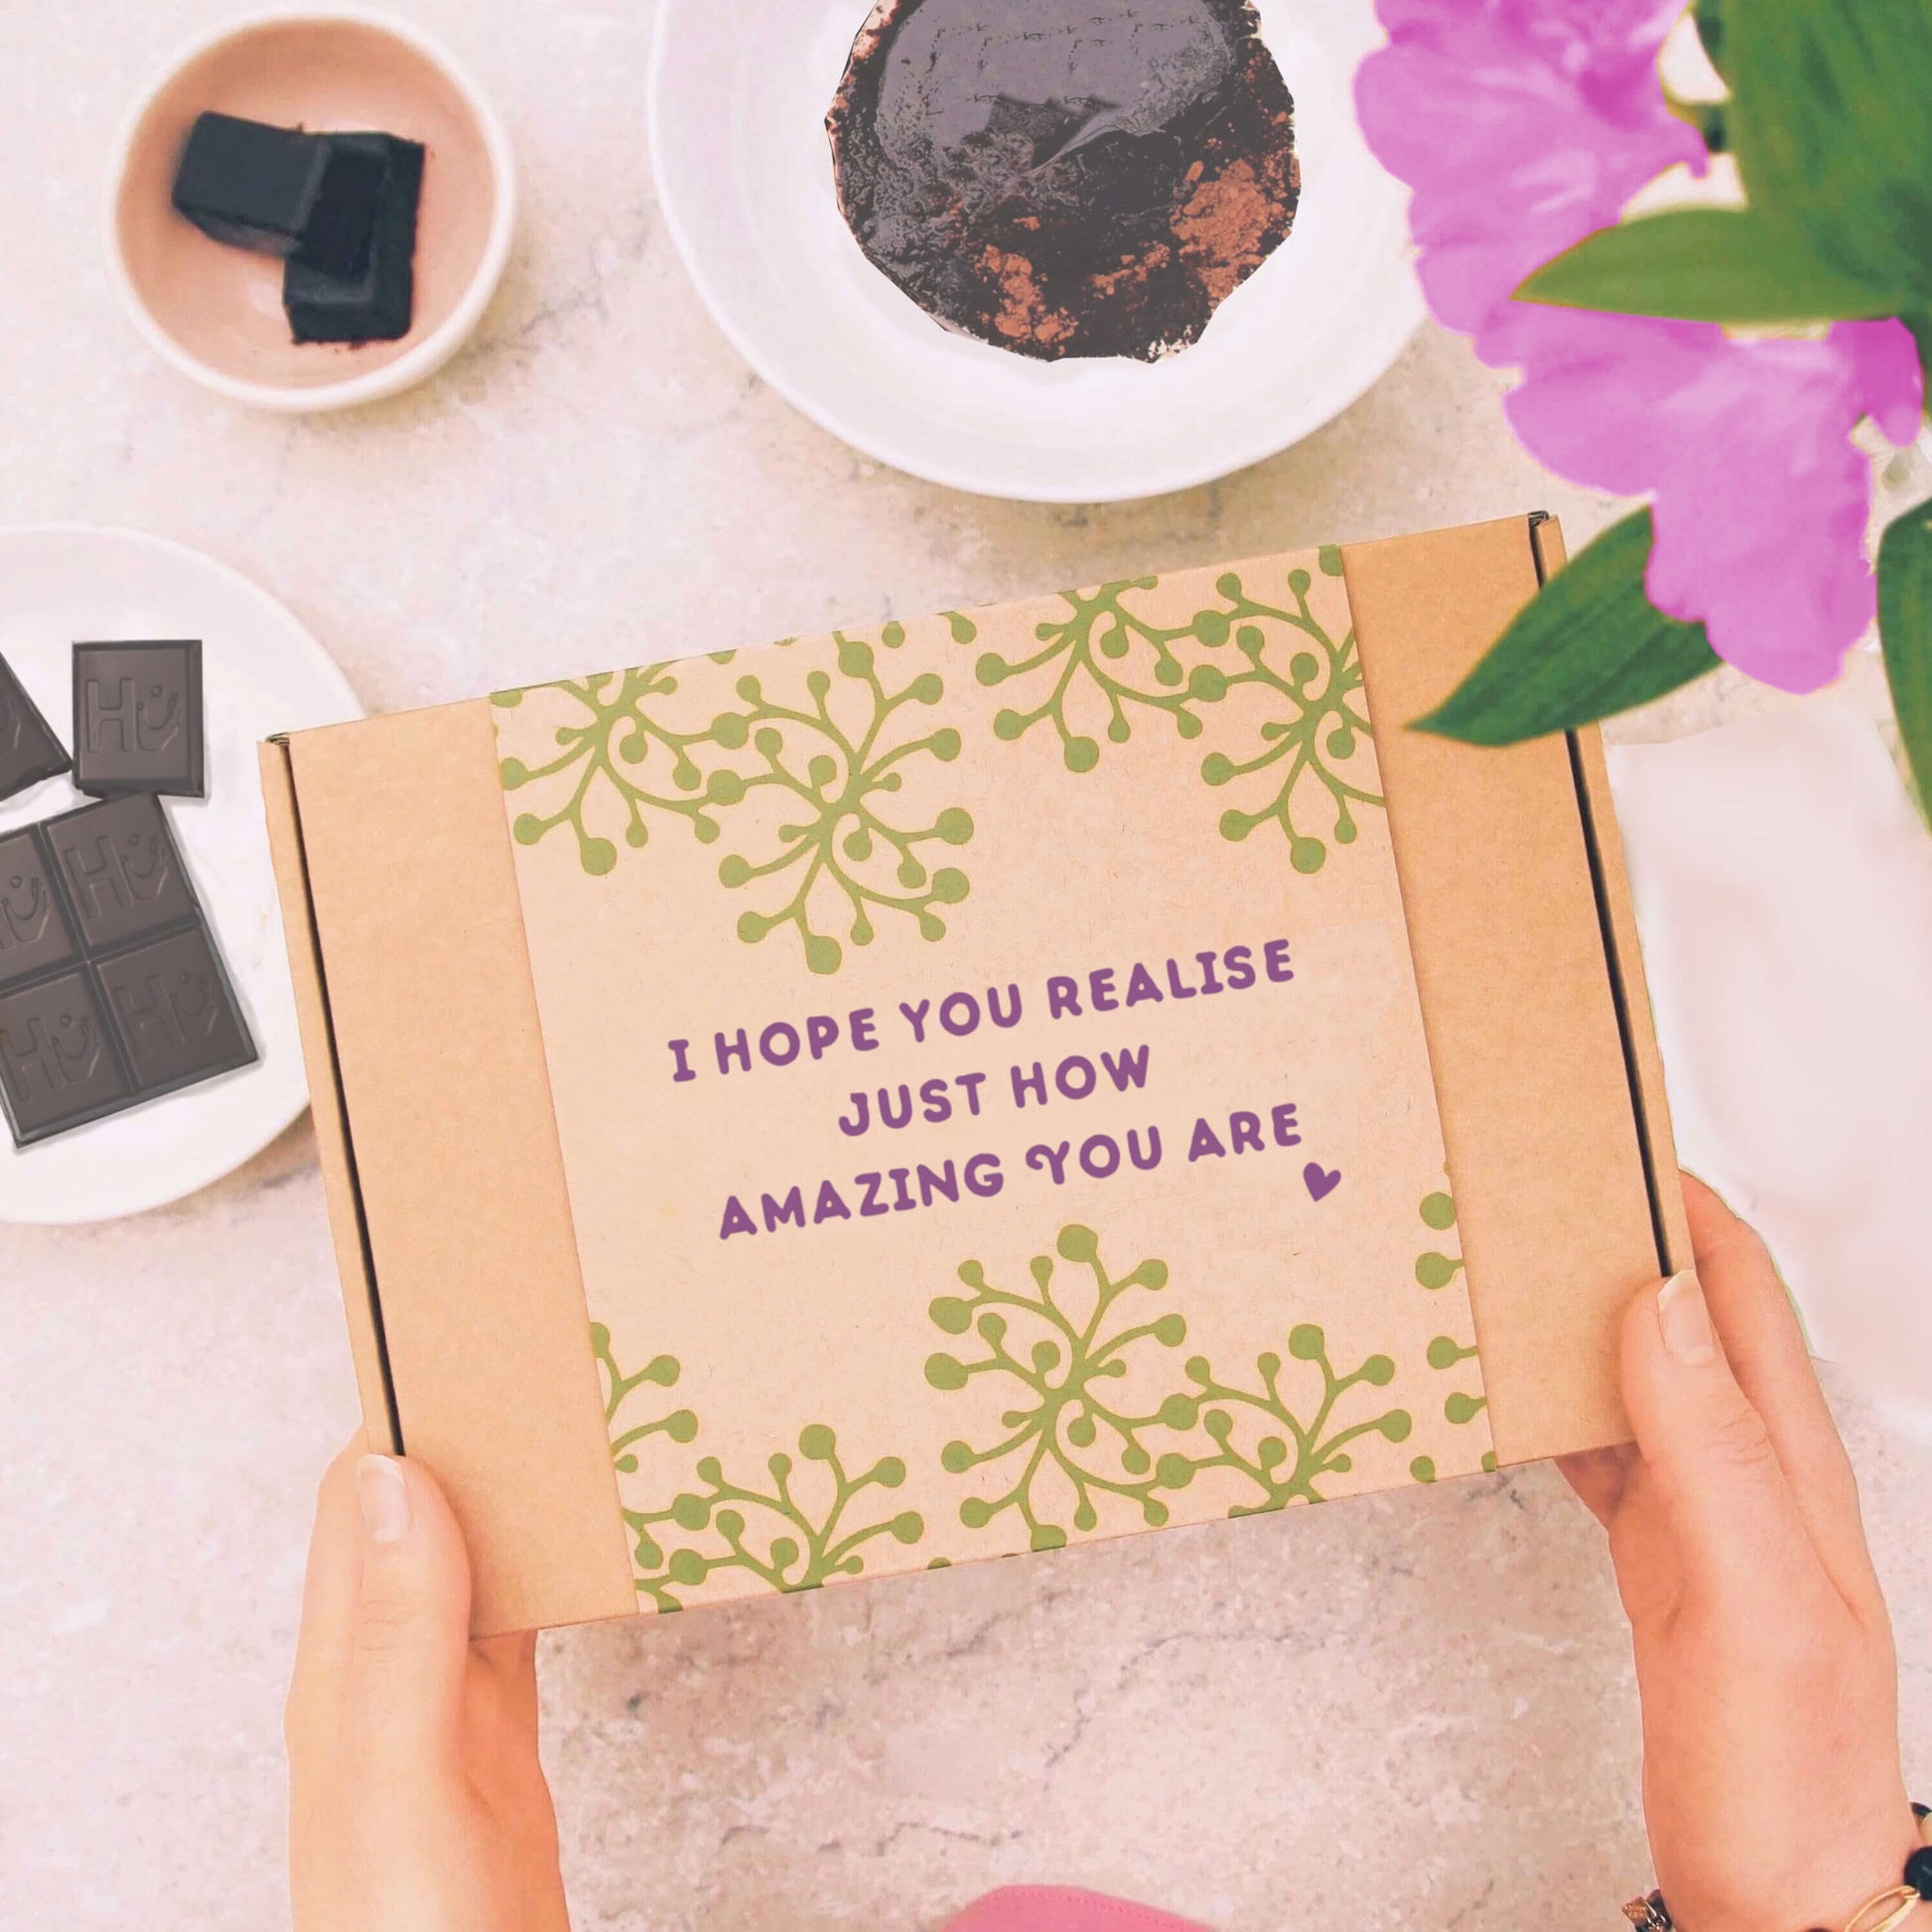 letterbox gift with gift message 'i hope you realise just how amazing you are'